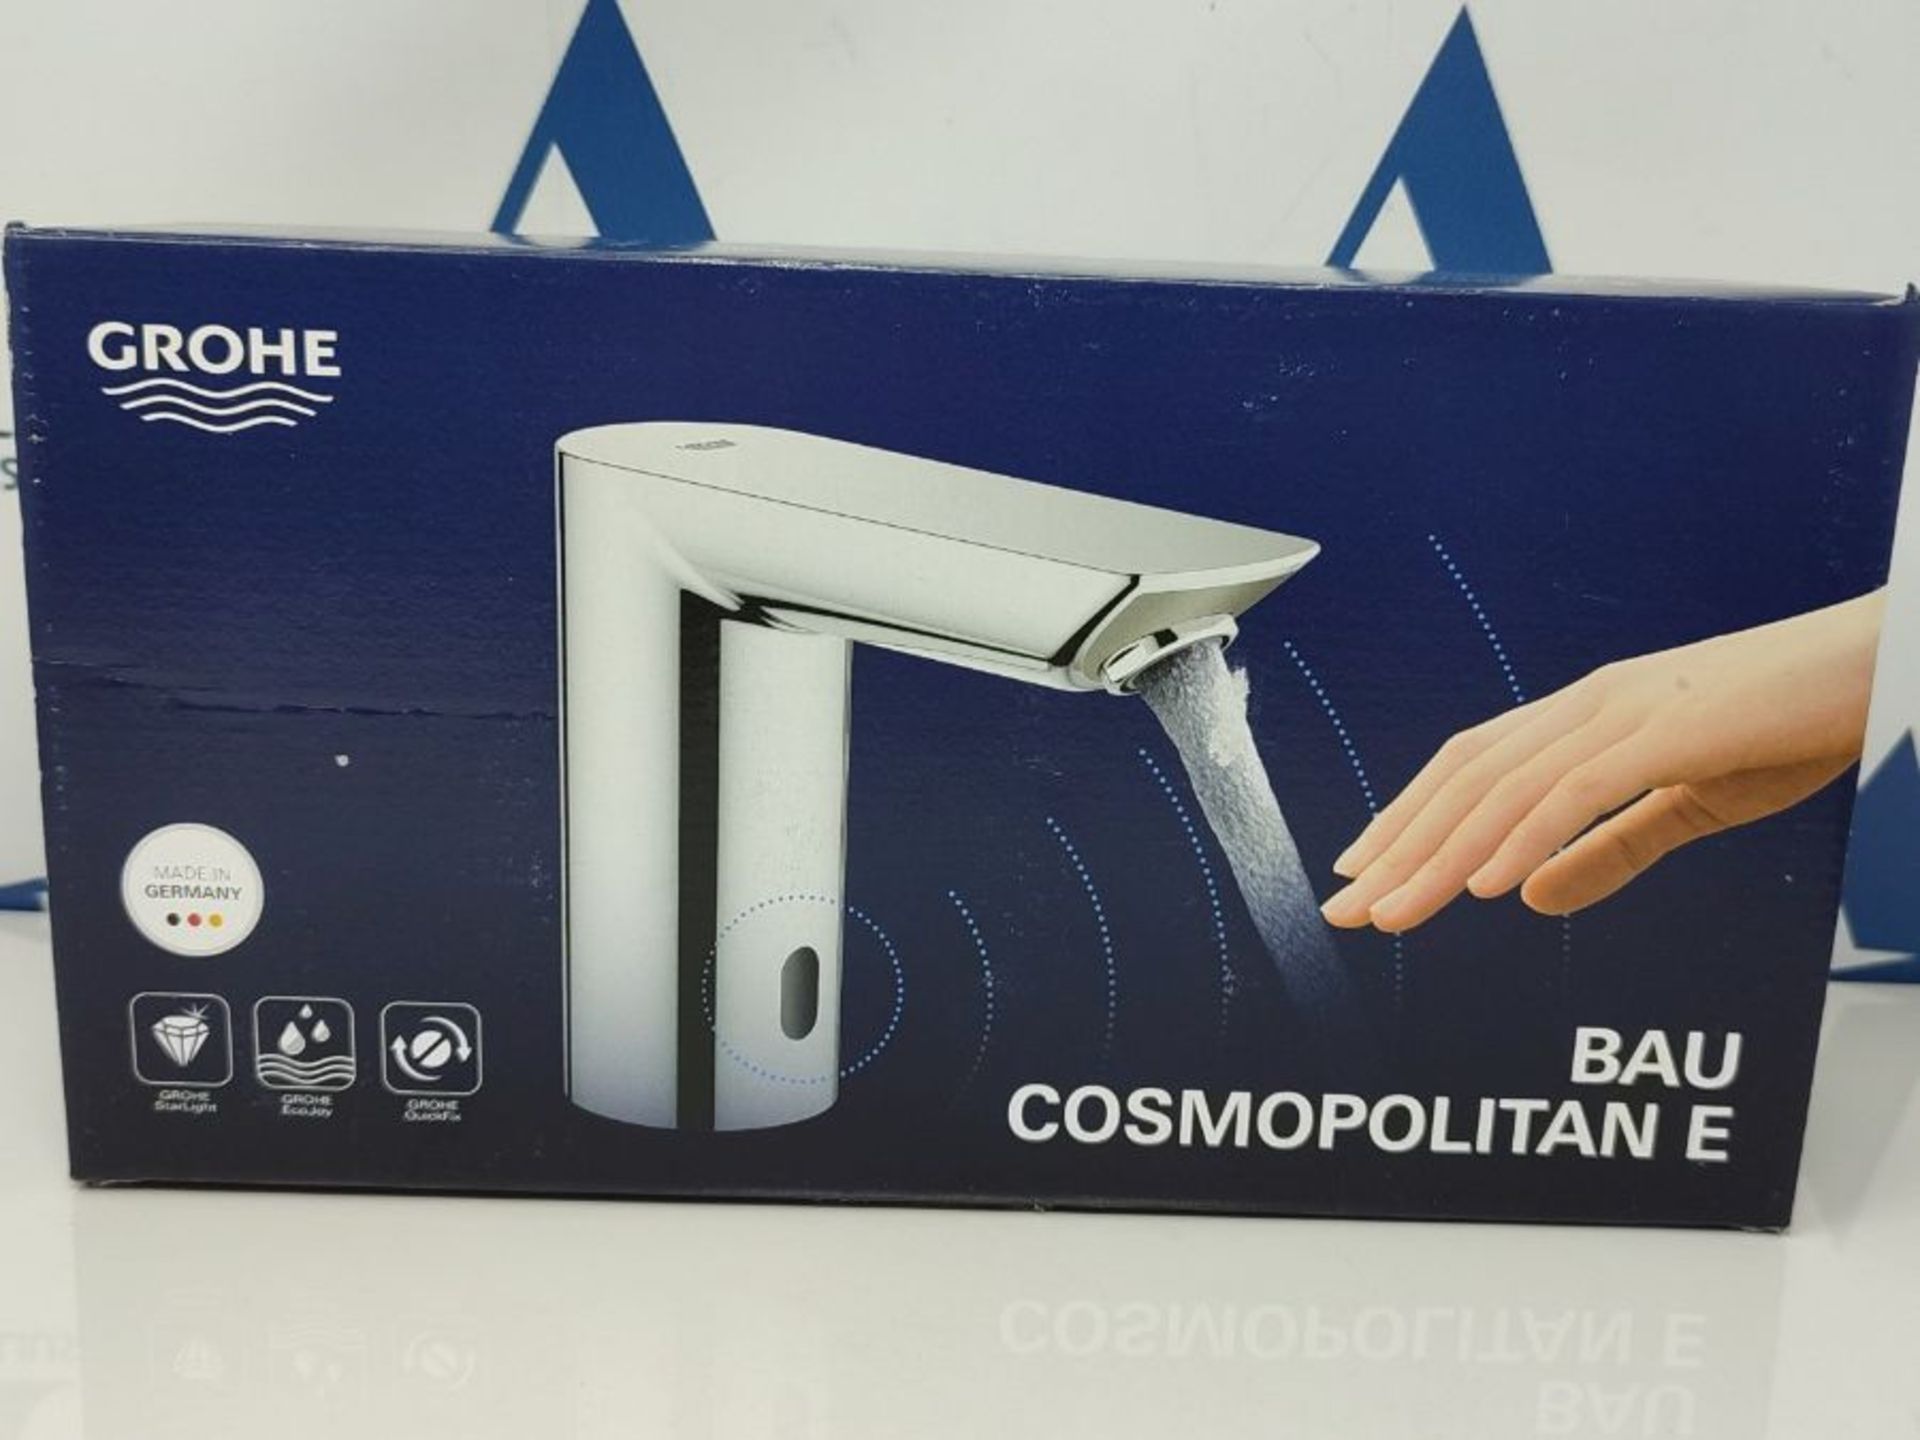 RRP £230.00 GROHE Bau Cosmopolitan E - Infrared Sensor Touchless Basin Mixer Tap with Mixing Devic - Image 2 of 3